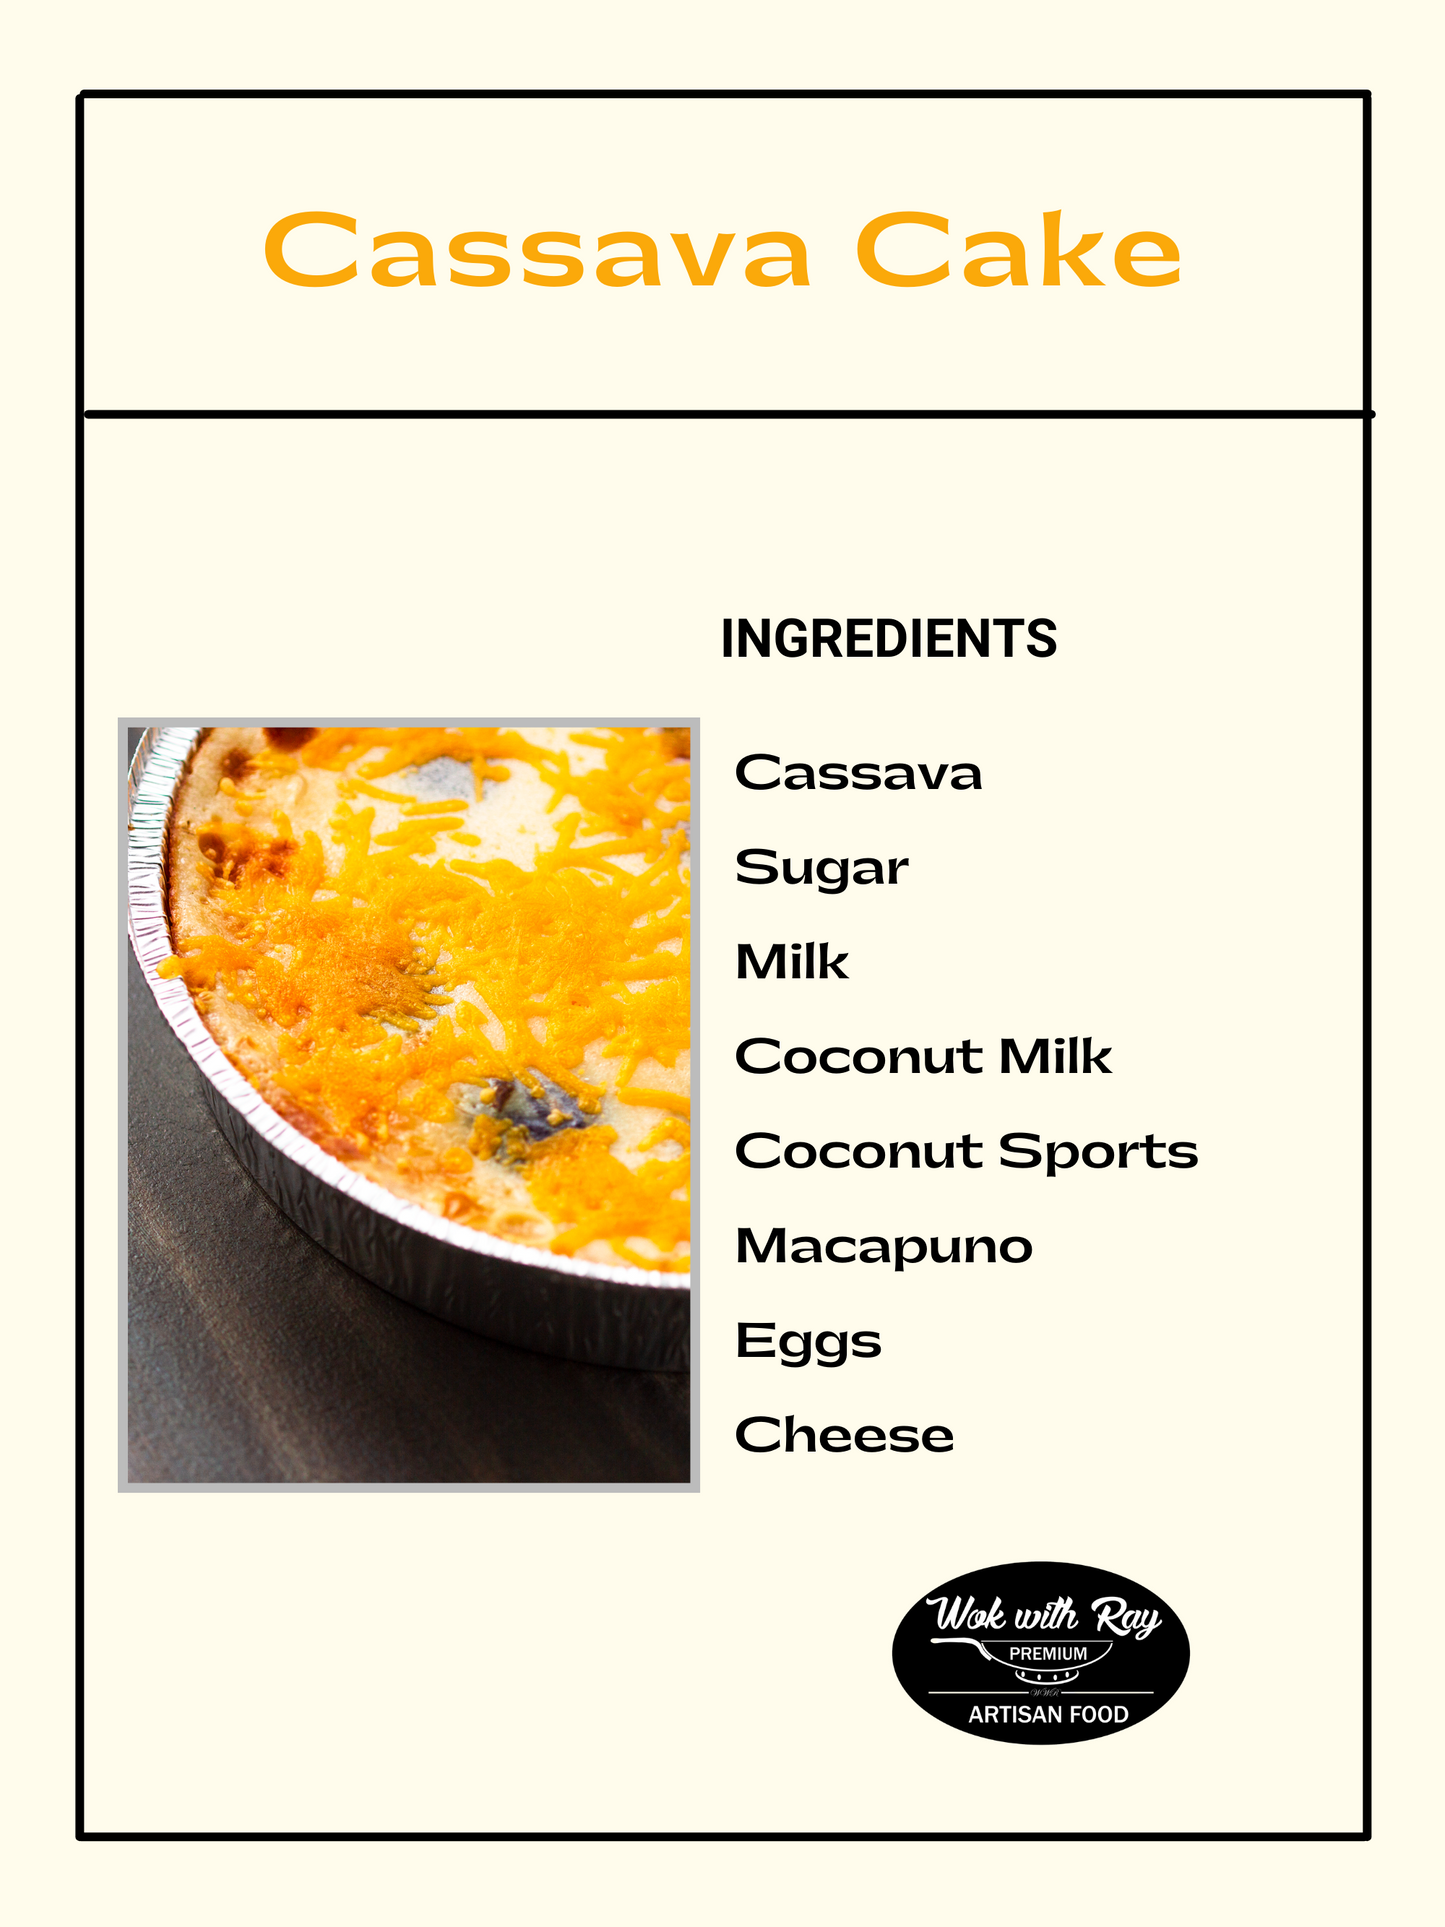 Delicious Cassava Cake with Macapuno - Filipino Dessert - 9-inch Party Tray. Made to Order.